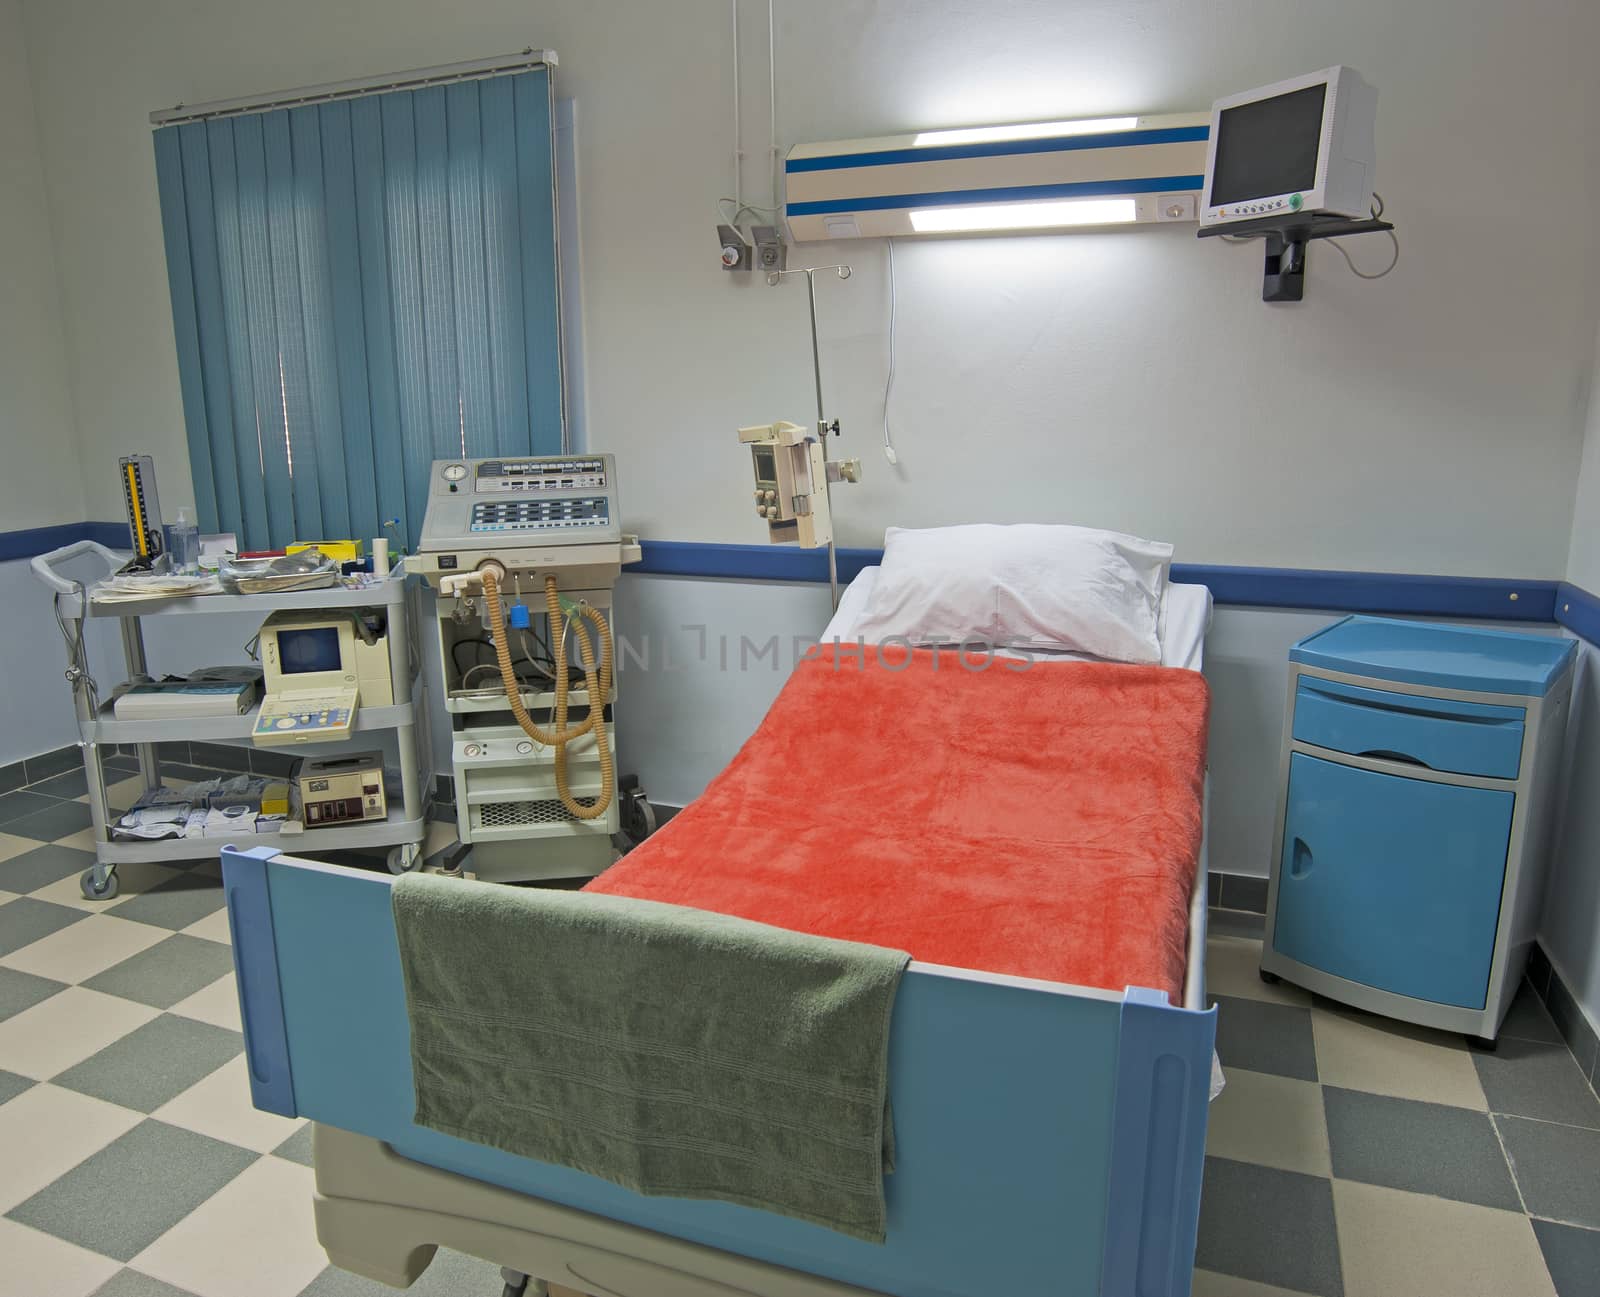 Intensive care ward in a medical centre with monitoring equipment